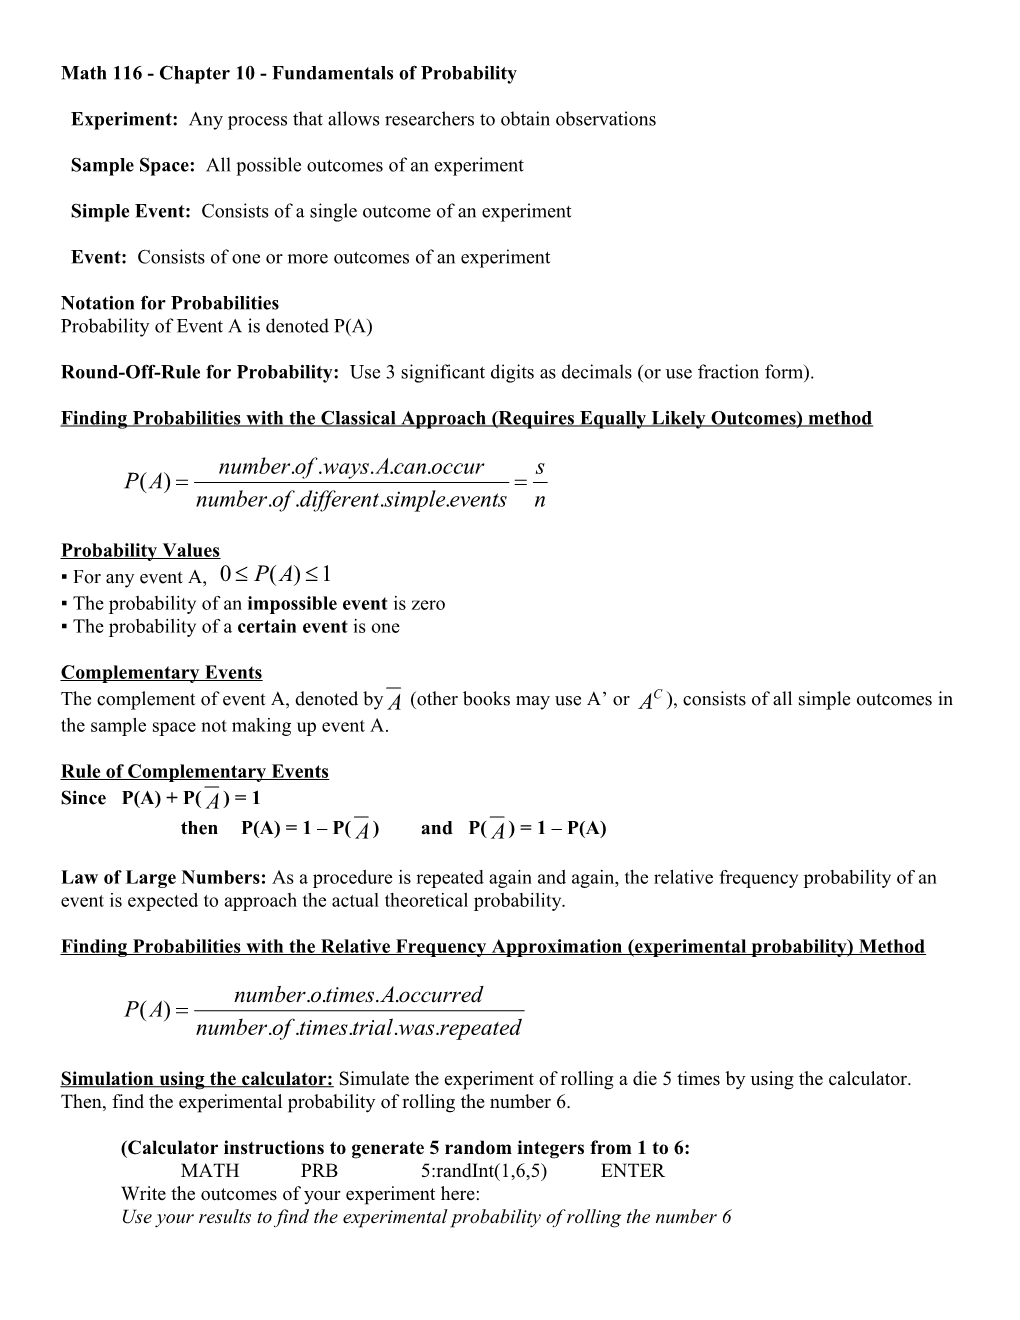 Math 116 - Chapter 10 - Fundamentals of Probability